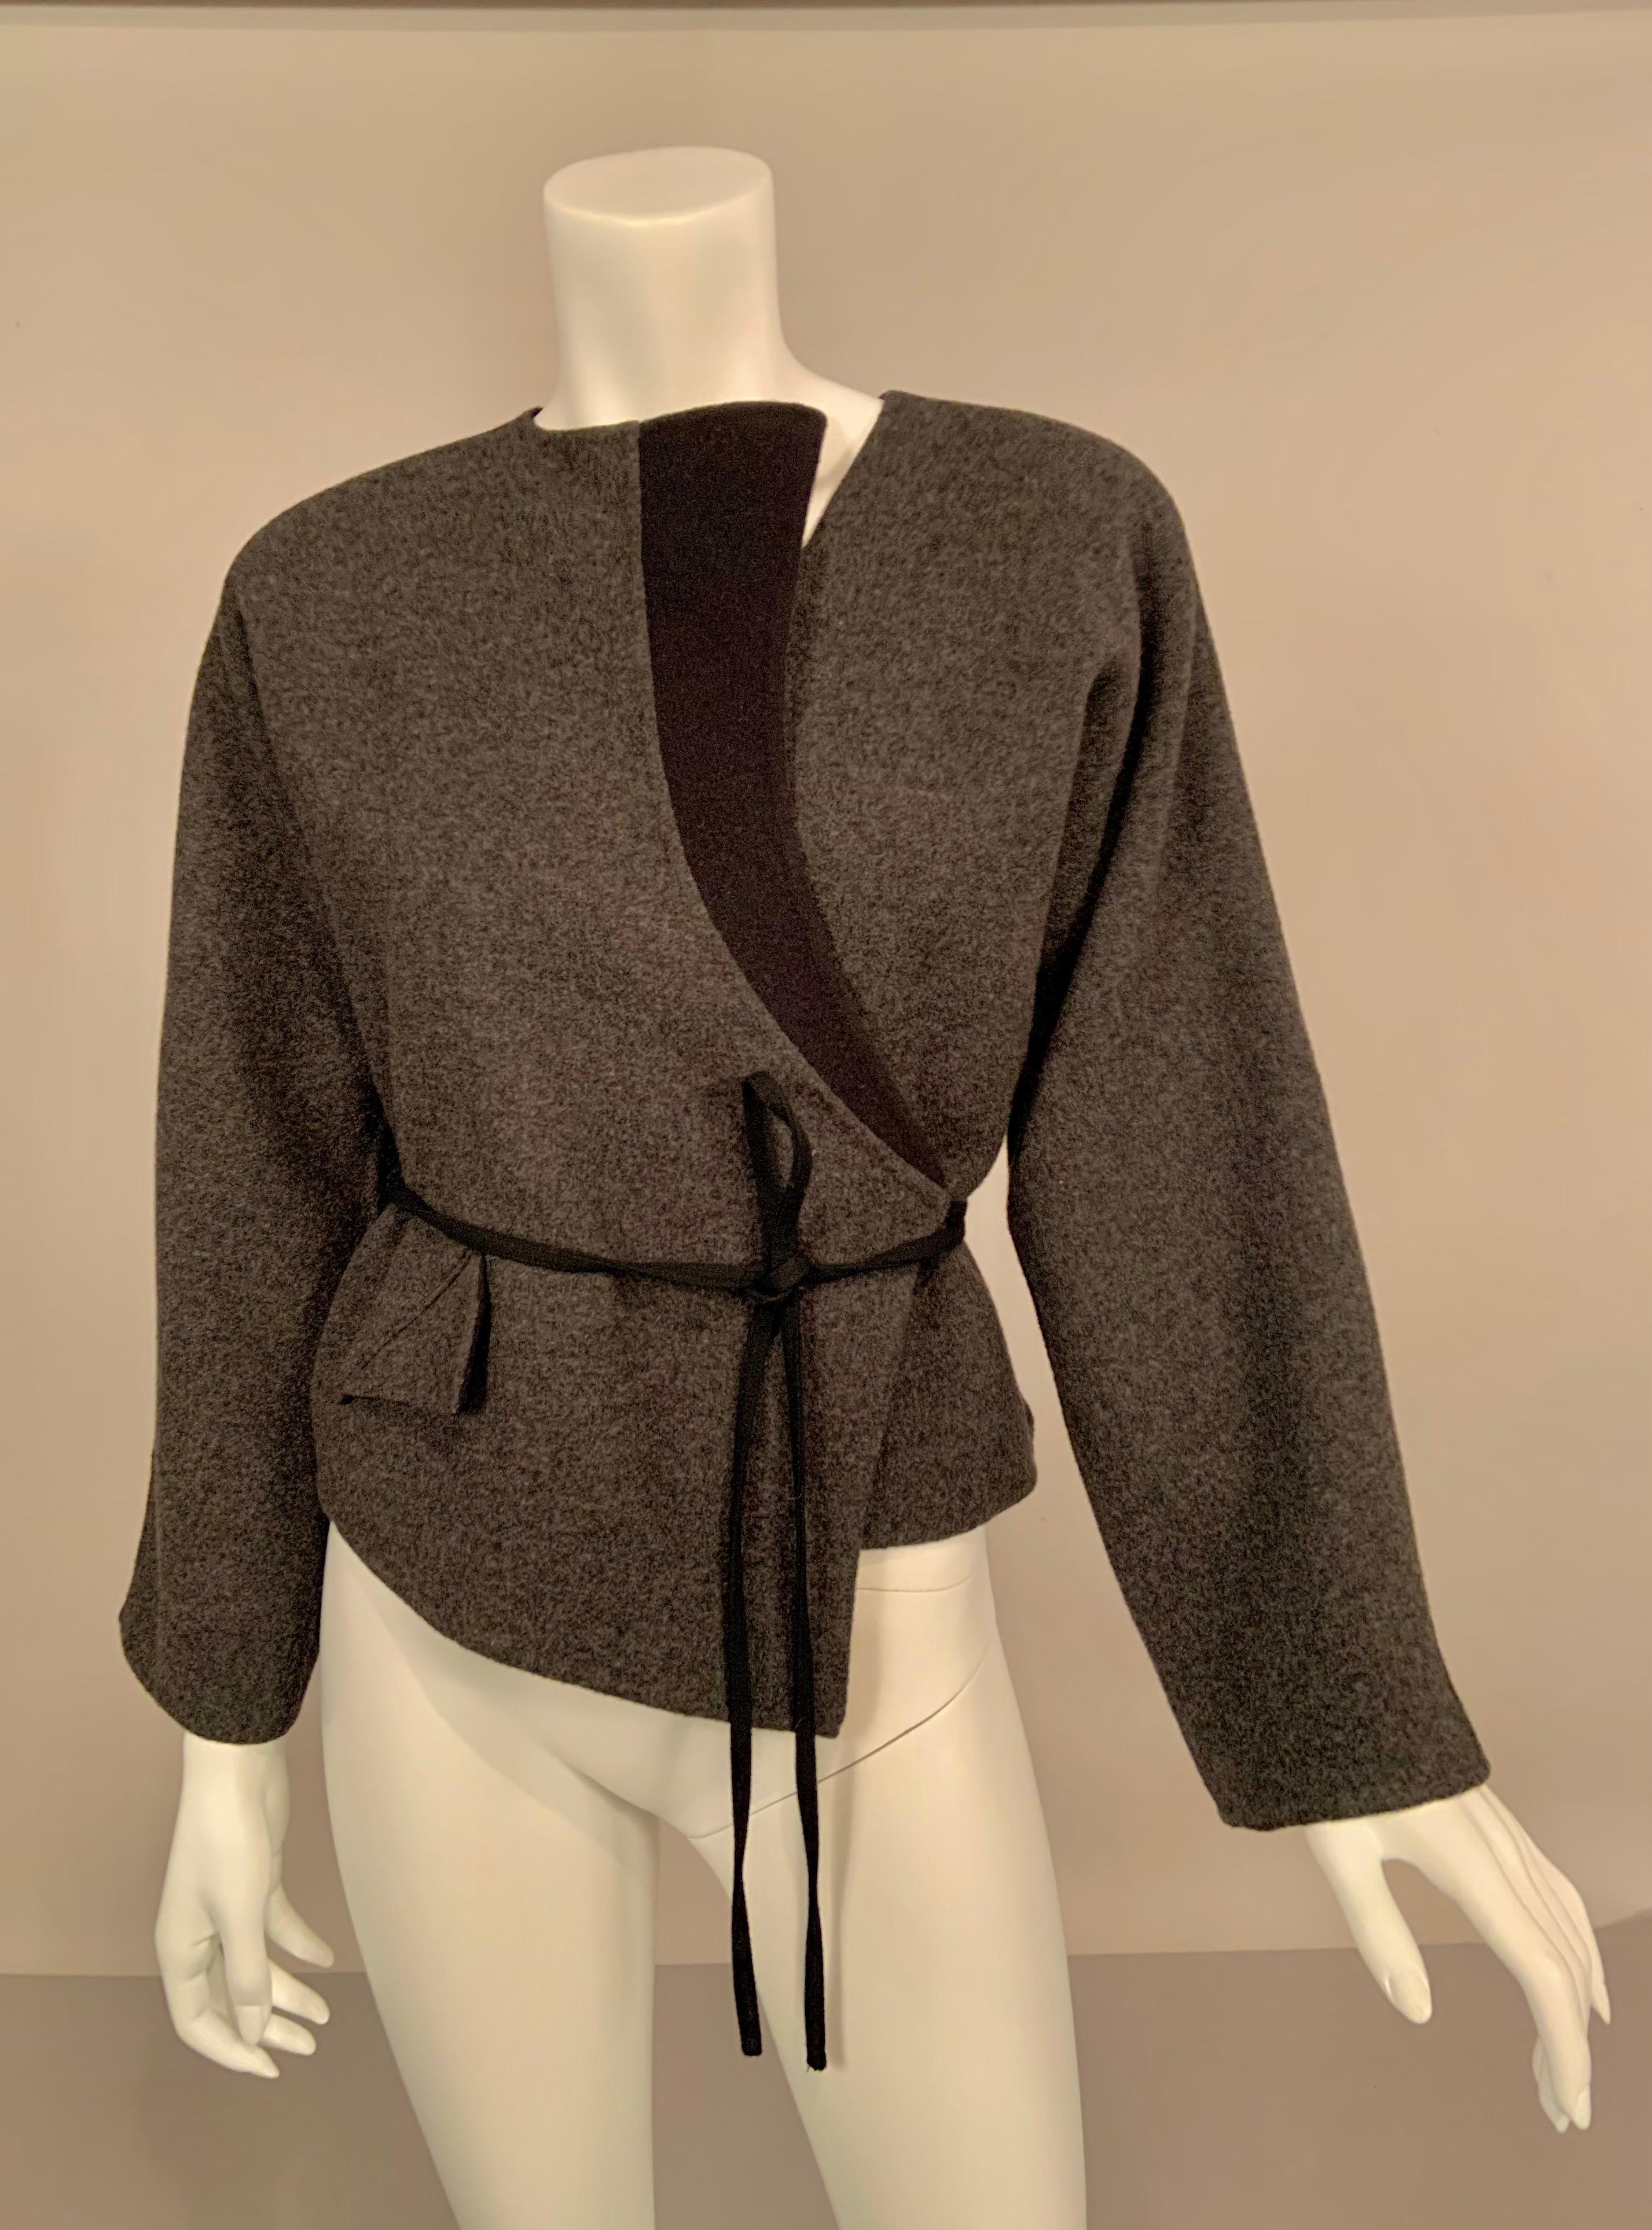 This charcoal grey double faced wool jacket is distinguished by a single lapel which is reversed to the black wool side of the material.  This lapel extends to the black woven cord which wraps around the waist and ties for closure. There is one